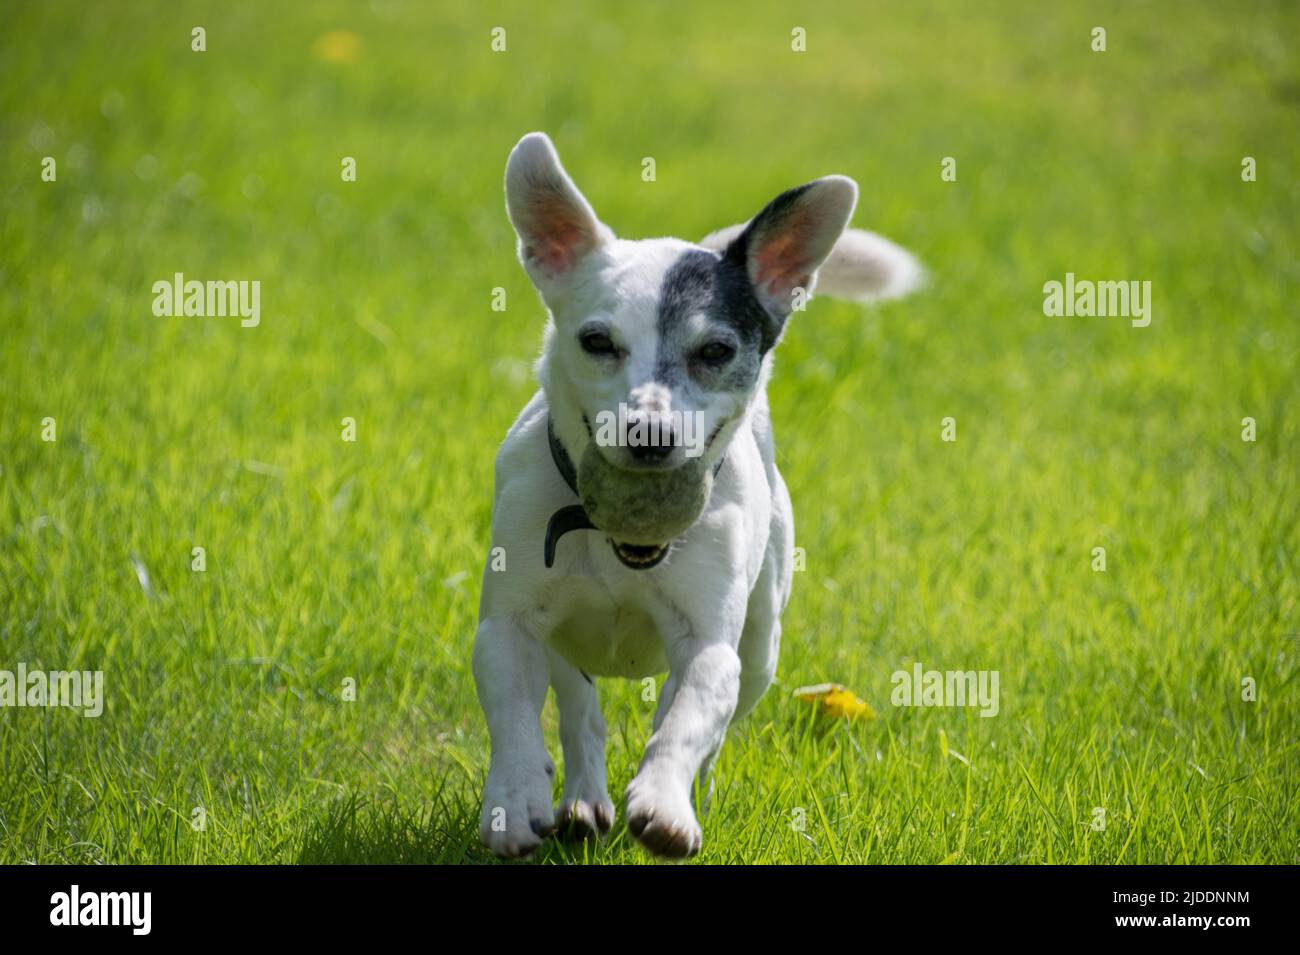 A smooth coated white Jack Russell running with a tennis ball in its mouth along green grass with its ears pricked upright Stock Photo